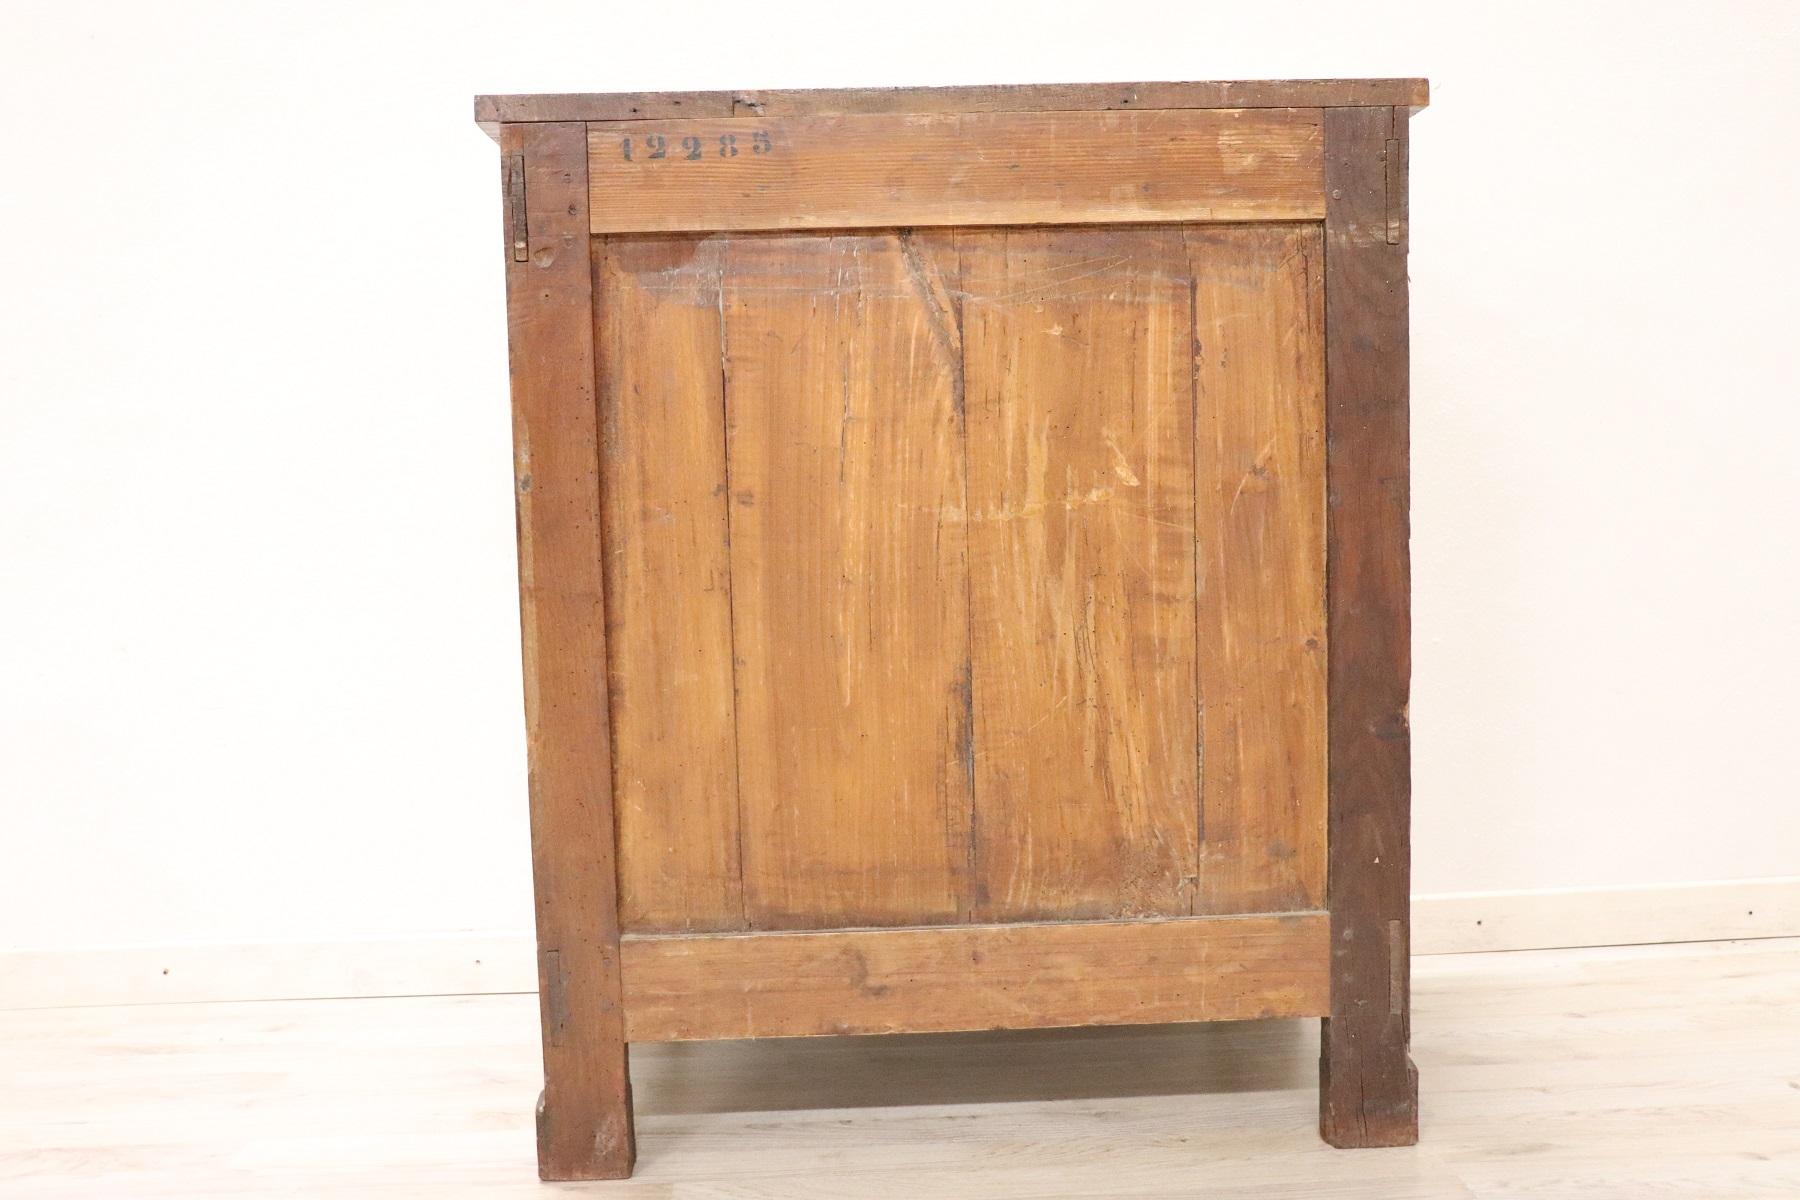 19th Century Italian Chestnut Wood Small Rustic Sideboard, Buffet or Credenza 1